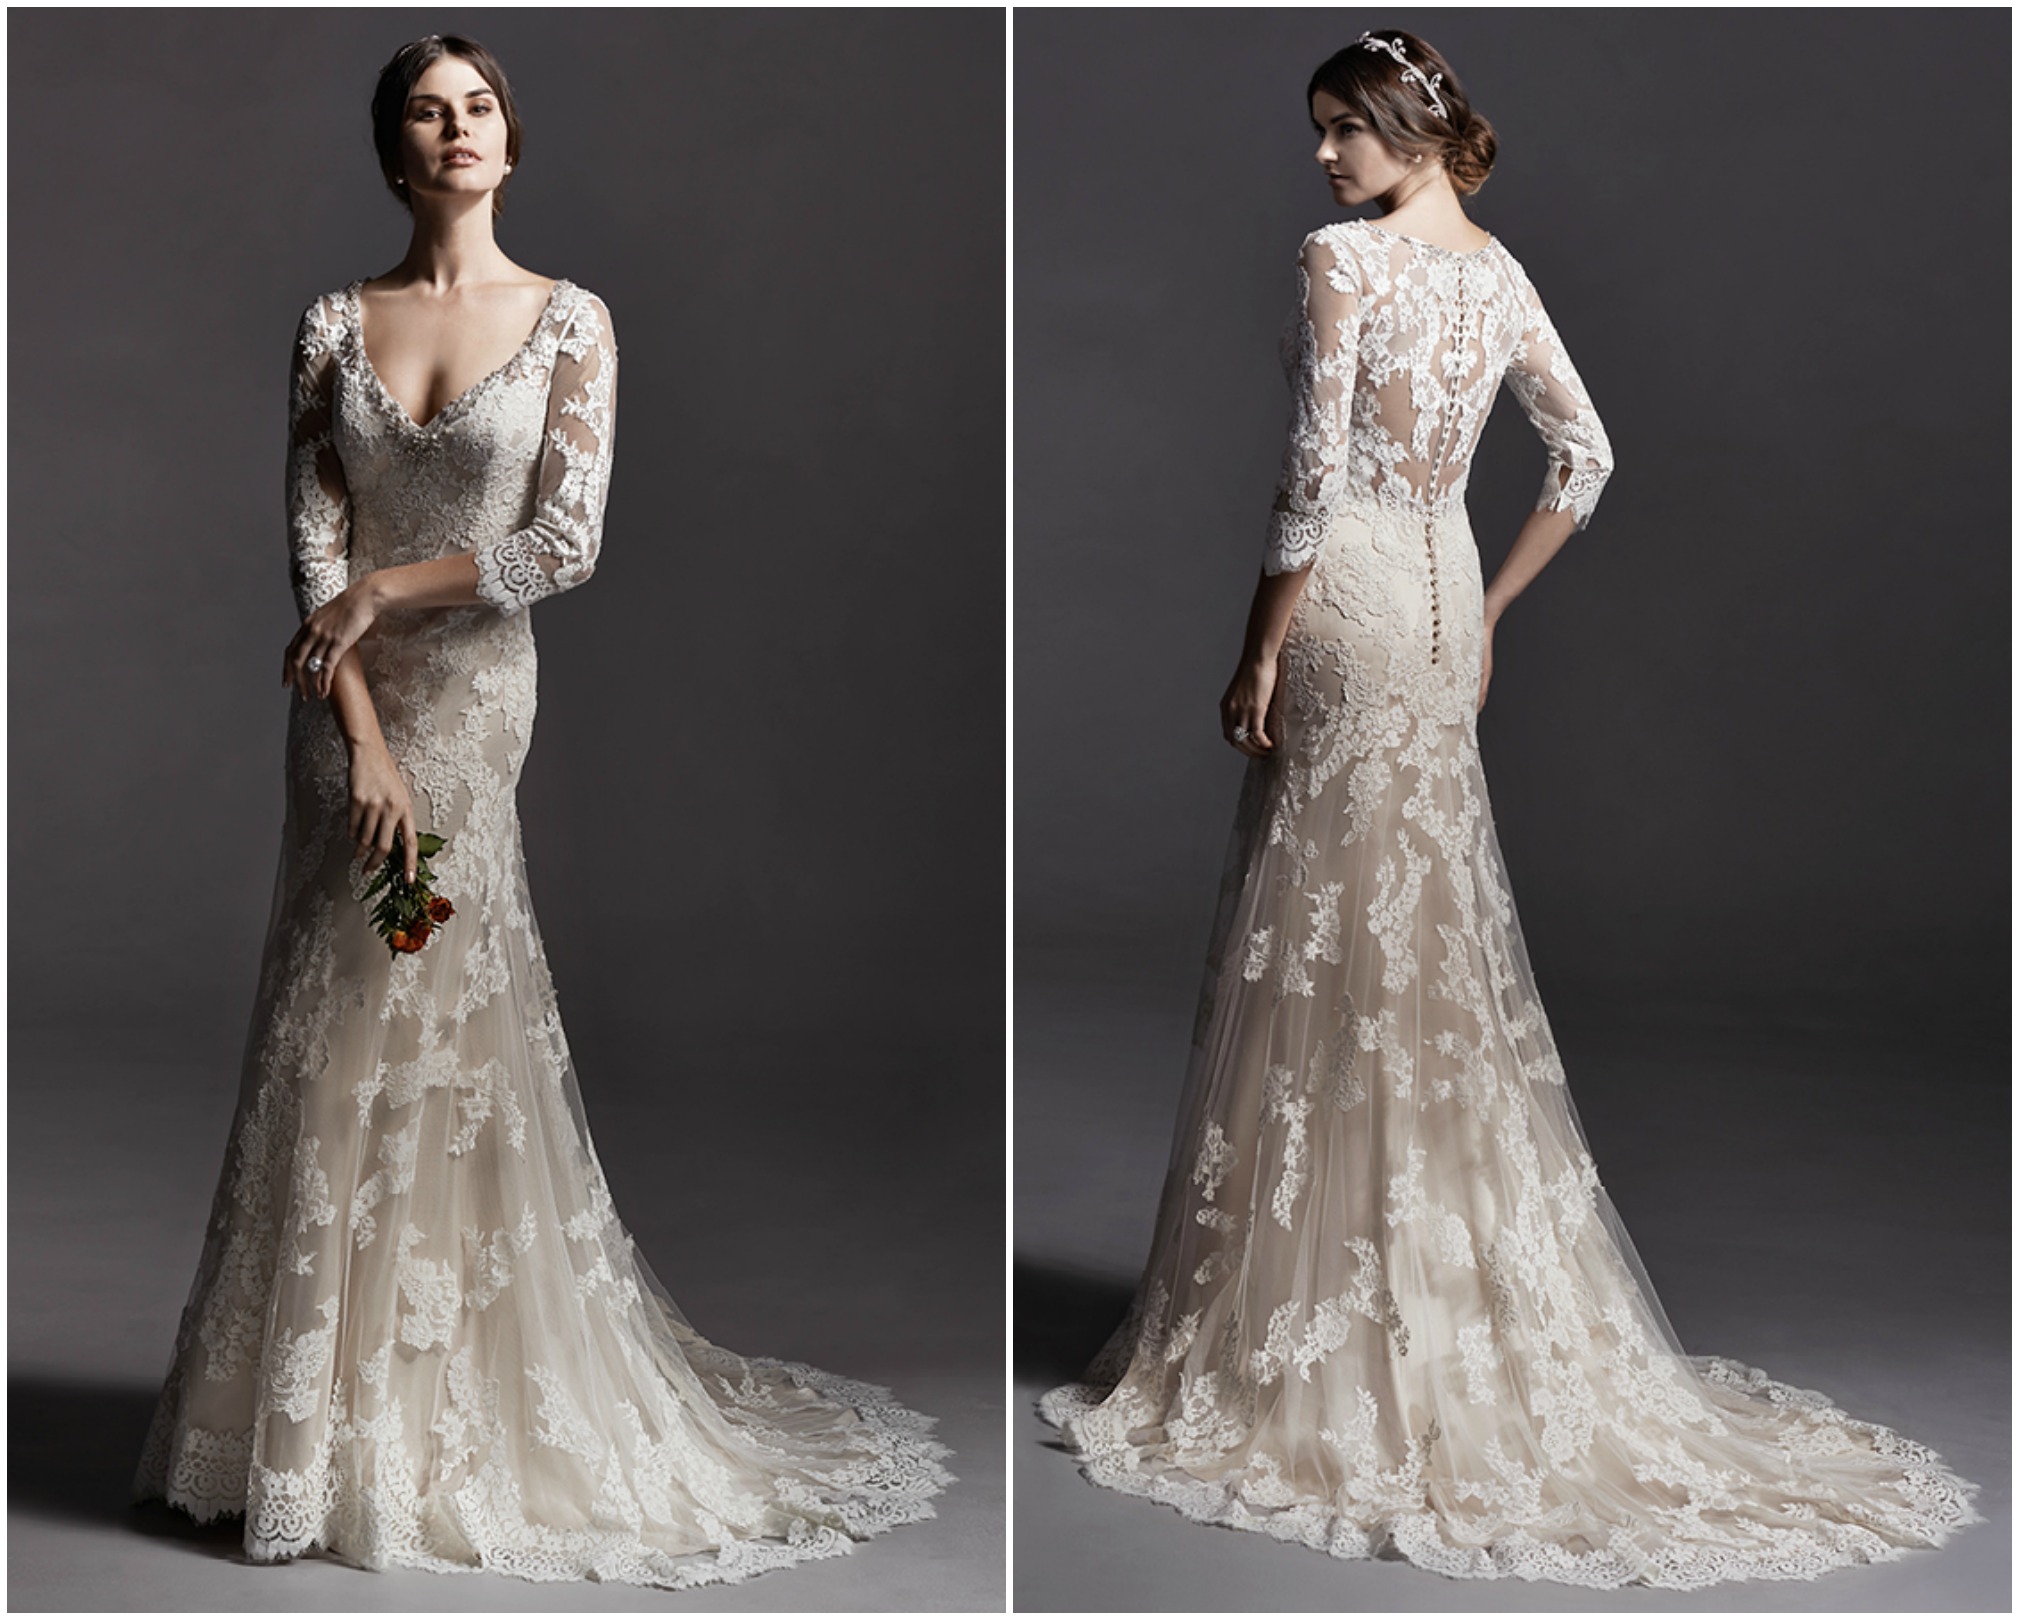 <a href="http://www.sotteroandmidgley.com/dress.aspx?style=5SW074&amp;page=0&amp;pageSize=36&amp;keywordText=&amp;keywordType=All" target="_blank">Sottero and Midgley 2016</a>